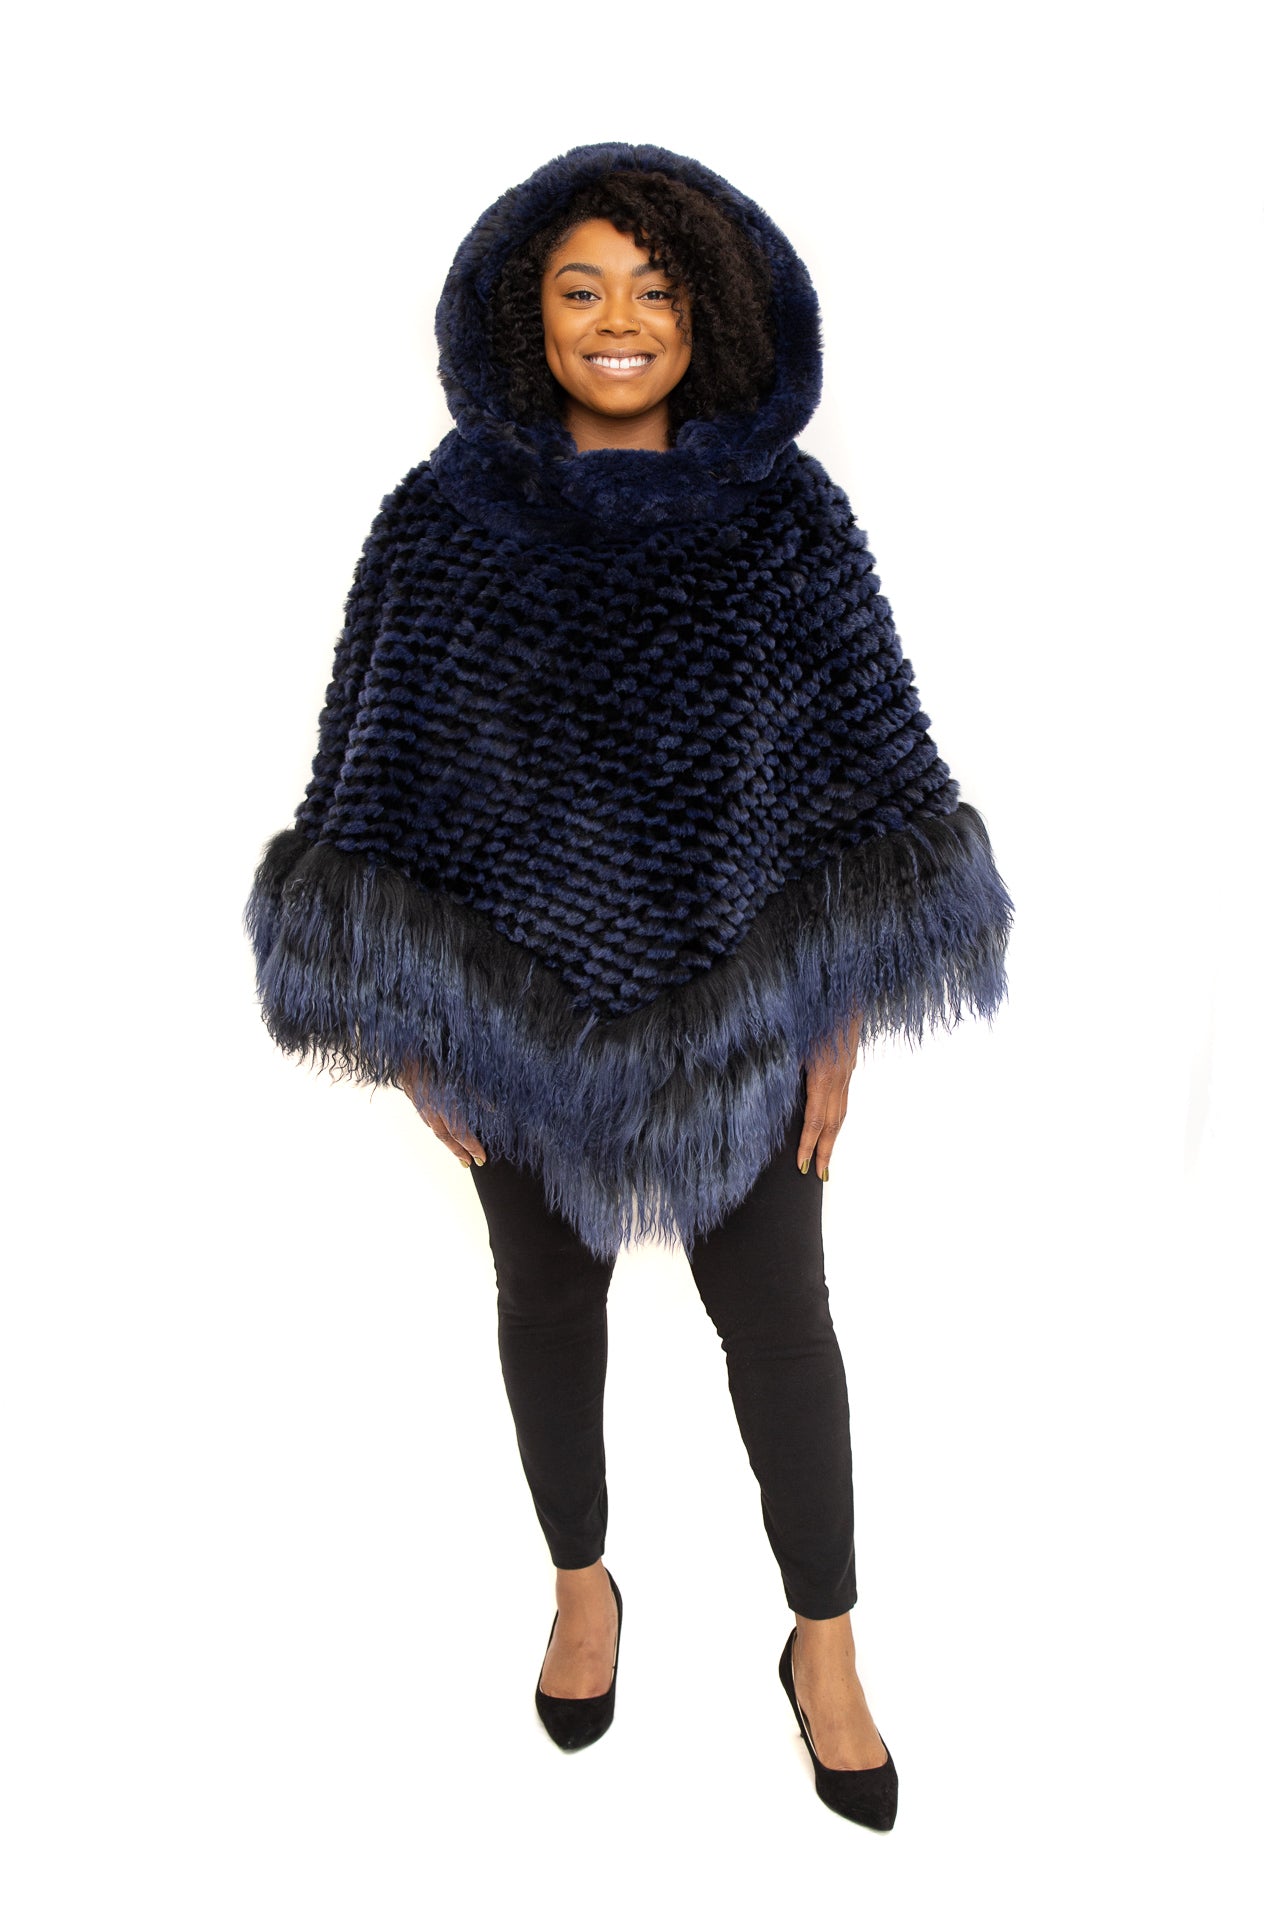 Blue Rex Cape, with Tibet Lamb Trim and Detachable Hood Available in Different Colors at Akron Summit Mall and Cleveland ETON Chagrin Boulevard